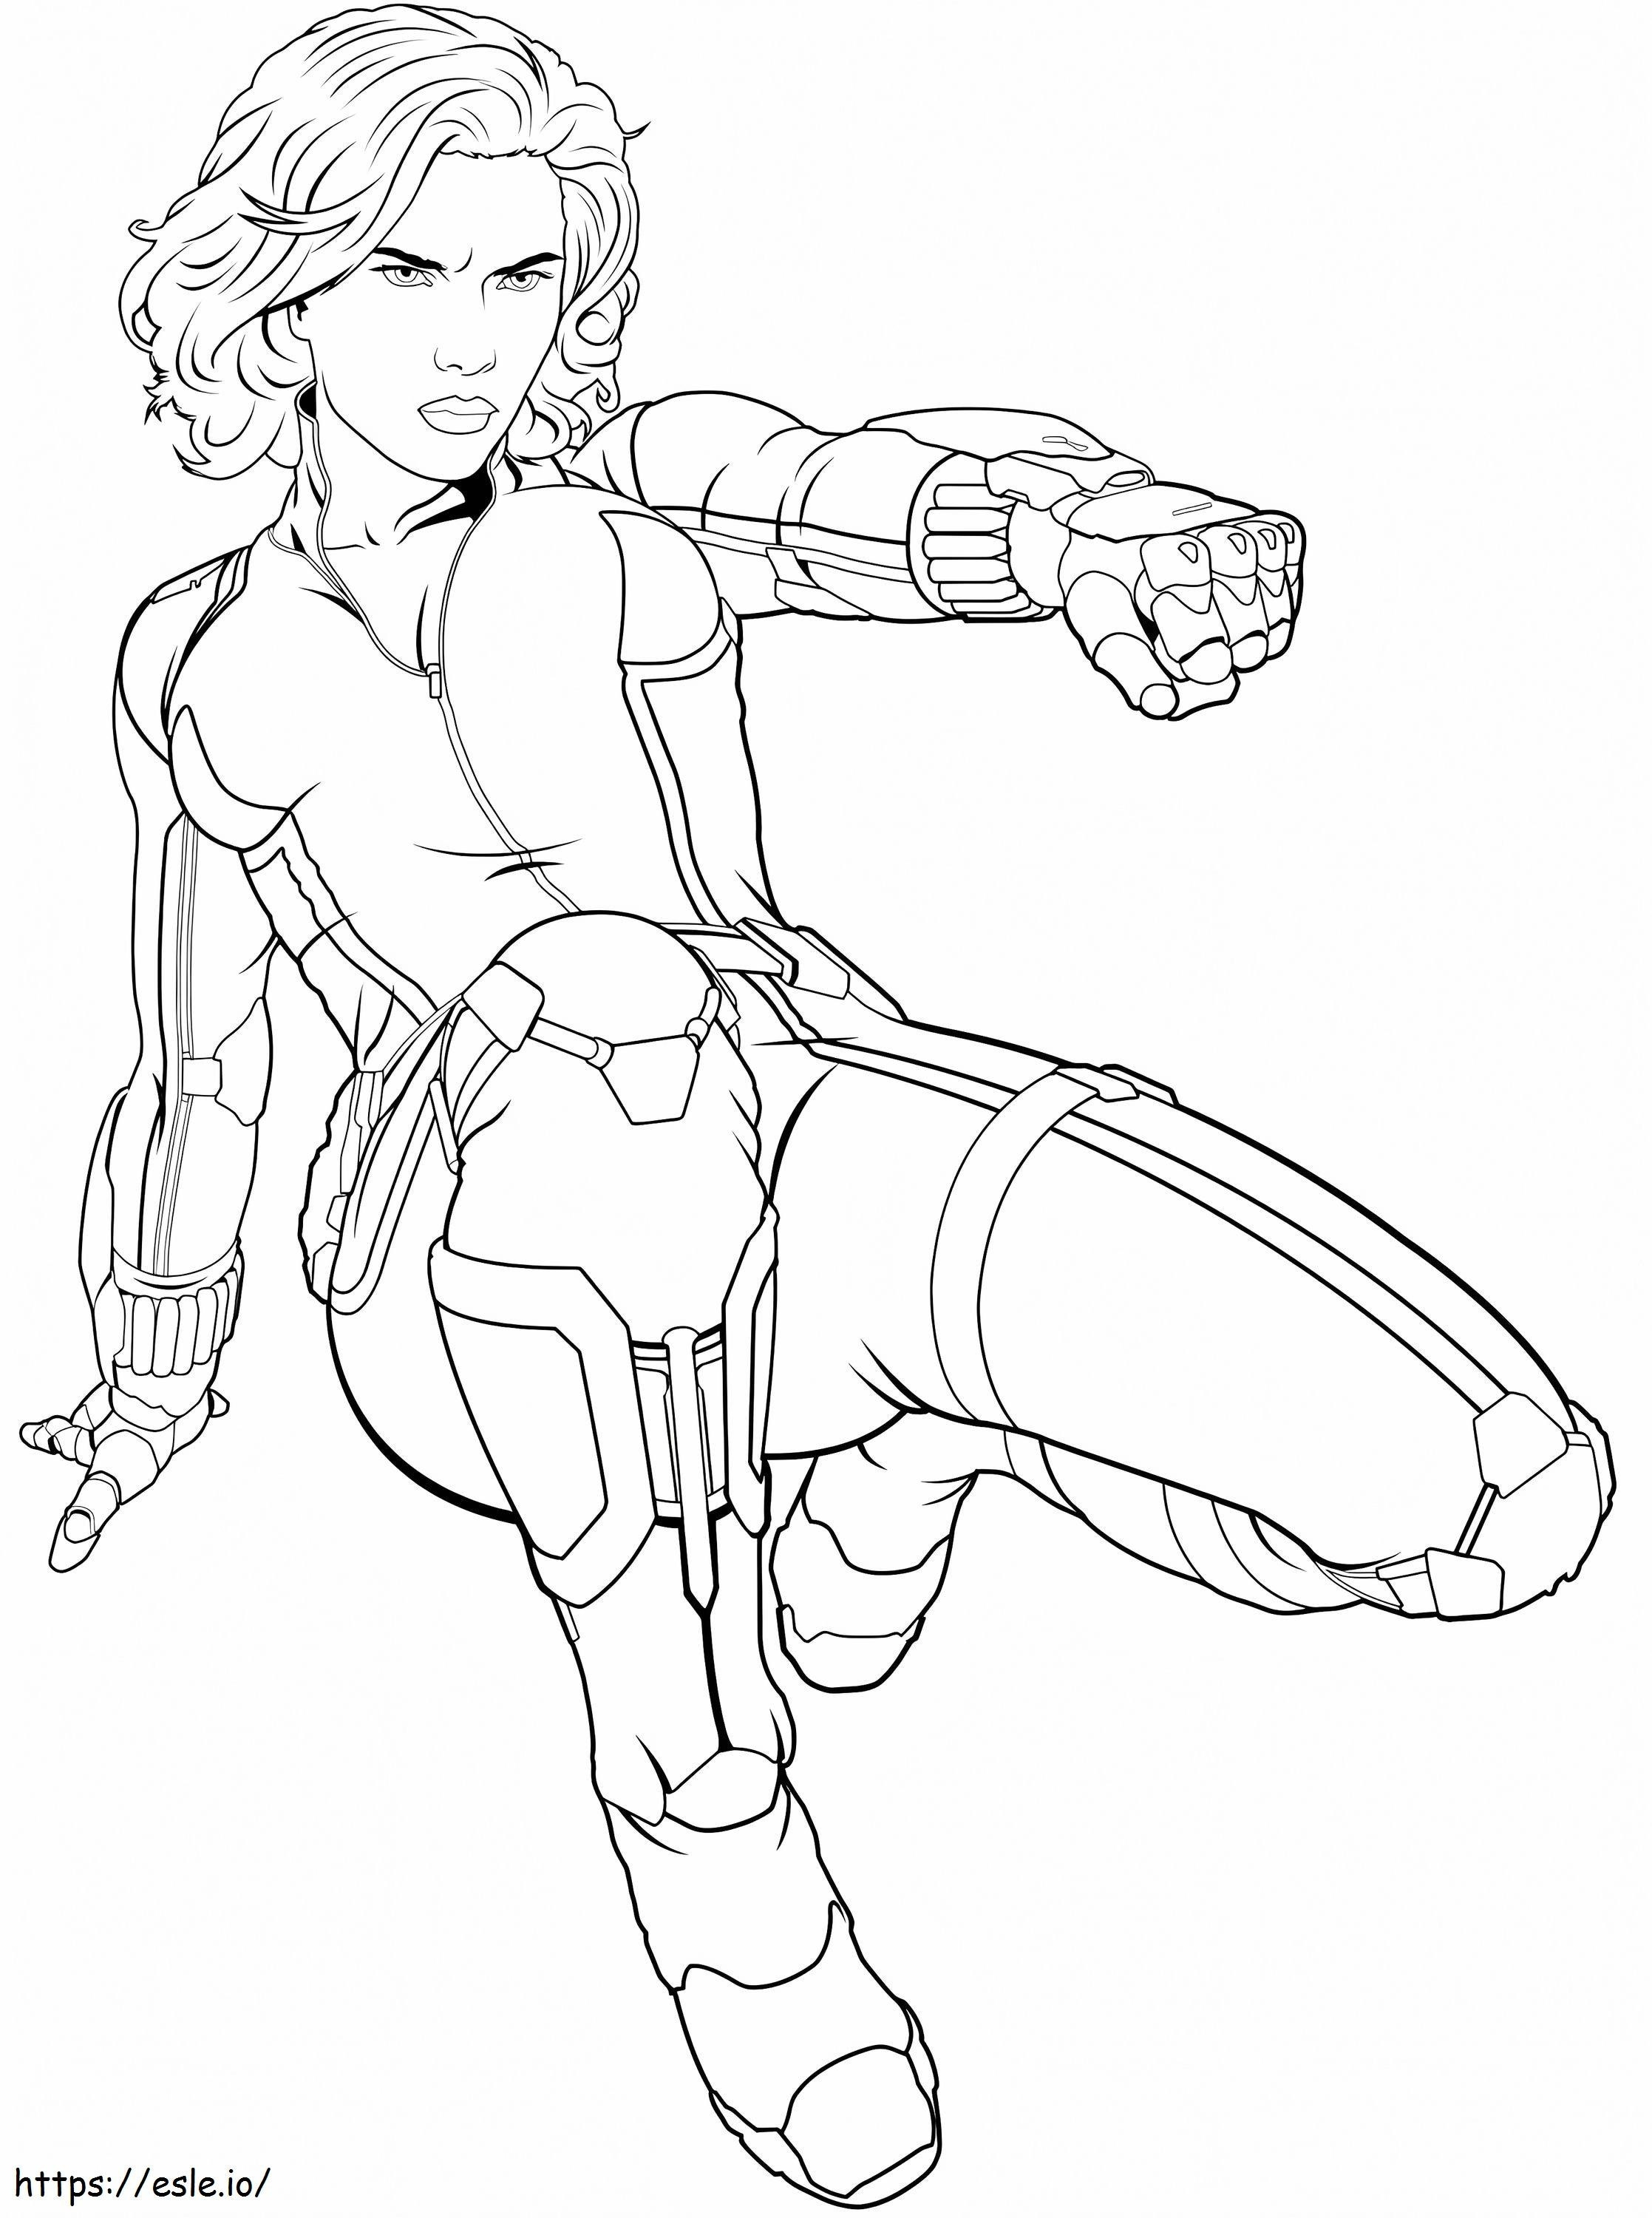 Black Widow In Avengers A4 coloring page